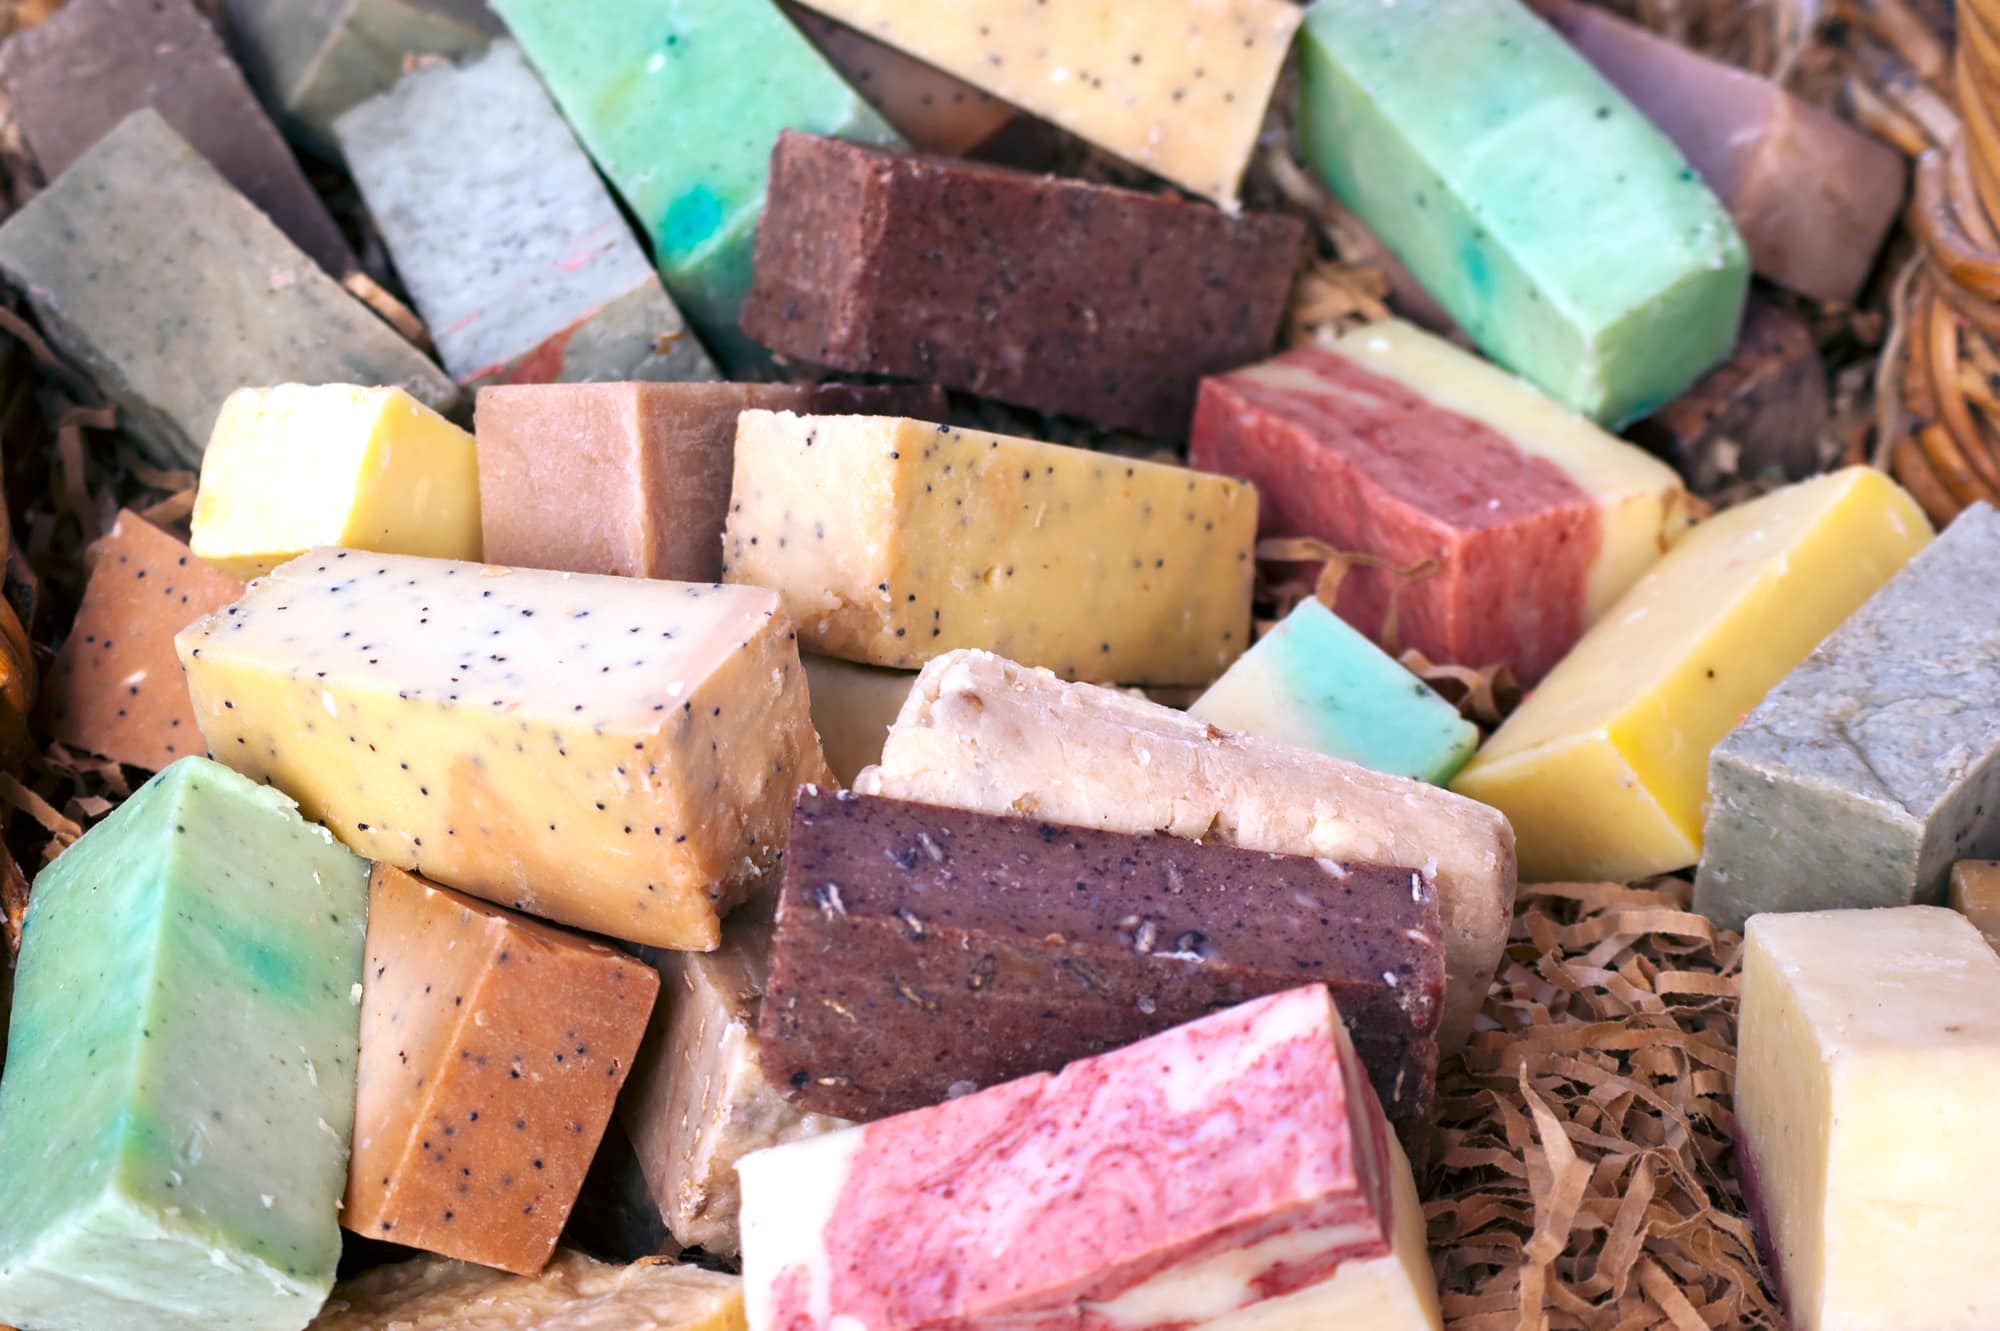 Is homemade soap better for your skin?